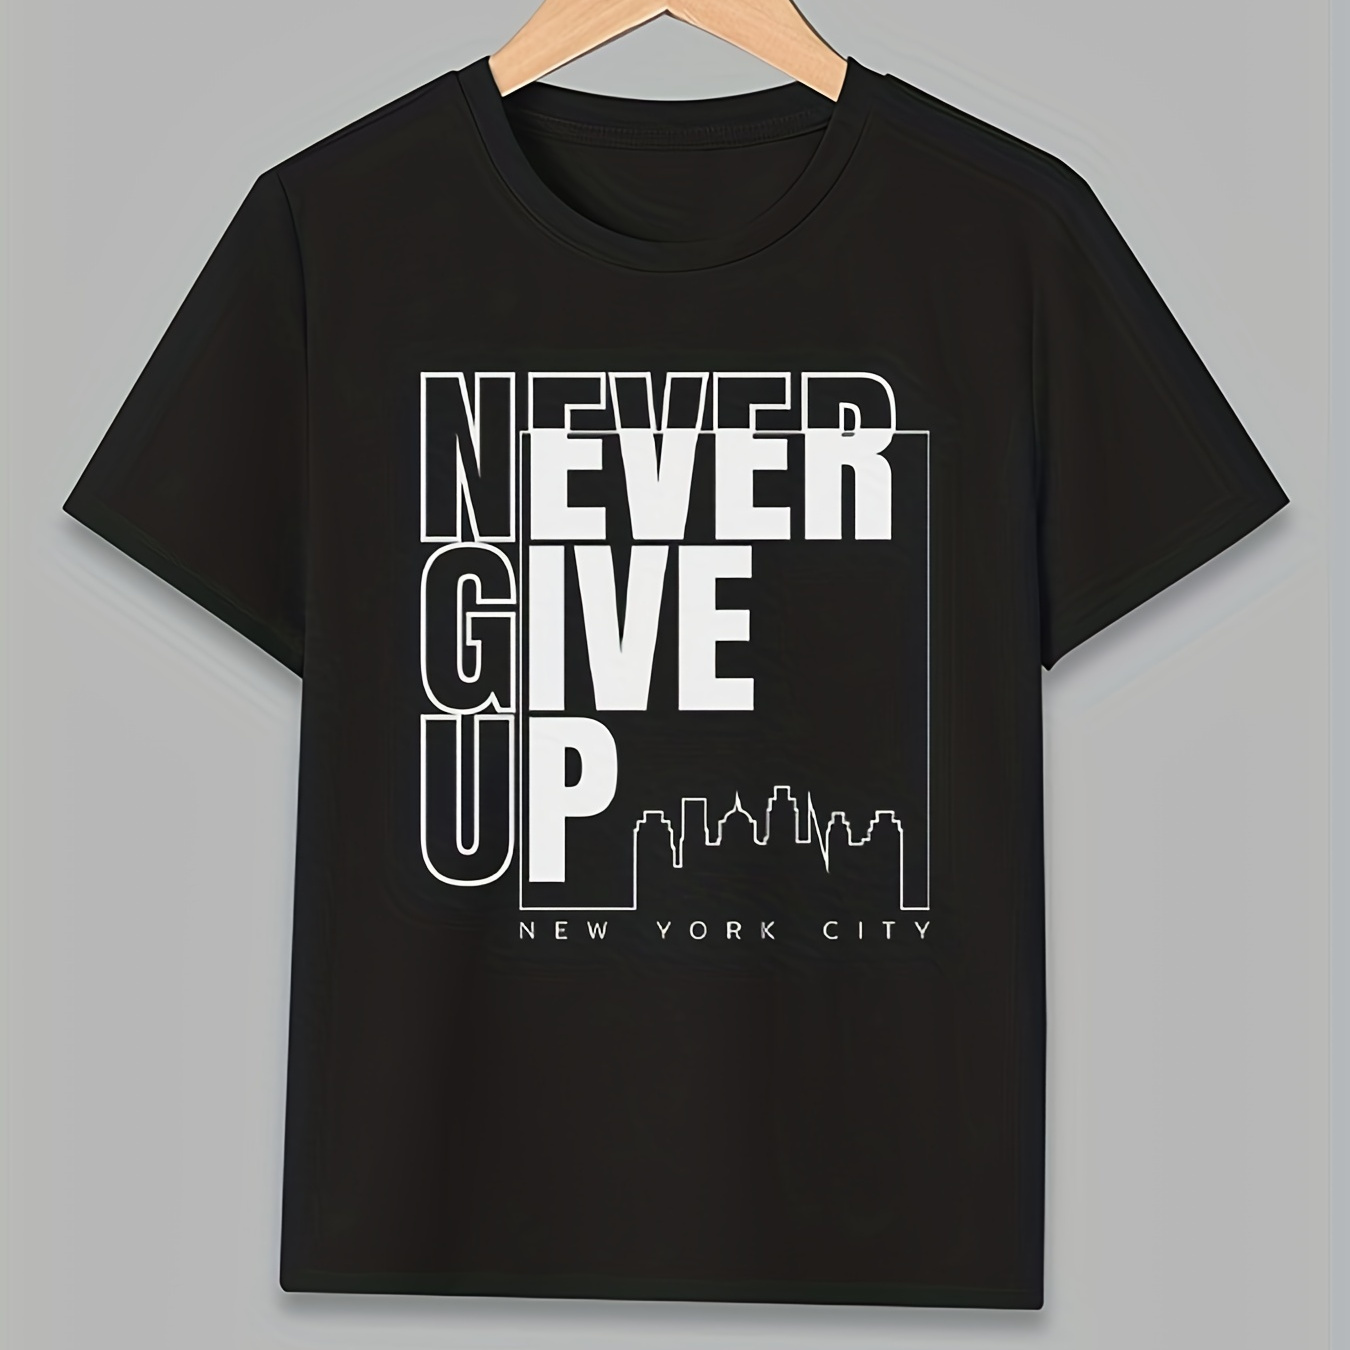 

Trendy Never Give Up Letter Print Boys Creative T-shirt, Casual Lightweight Comfy Short Sleeve Crew Neck Tee Tops, Kids Clothings For Summer